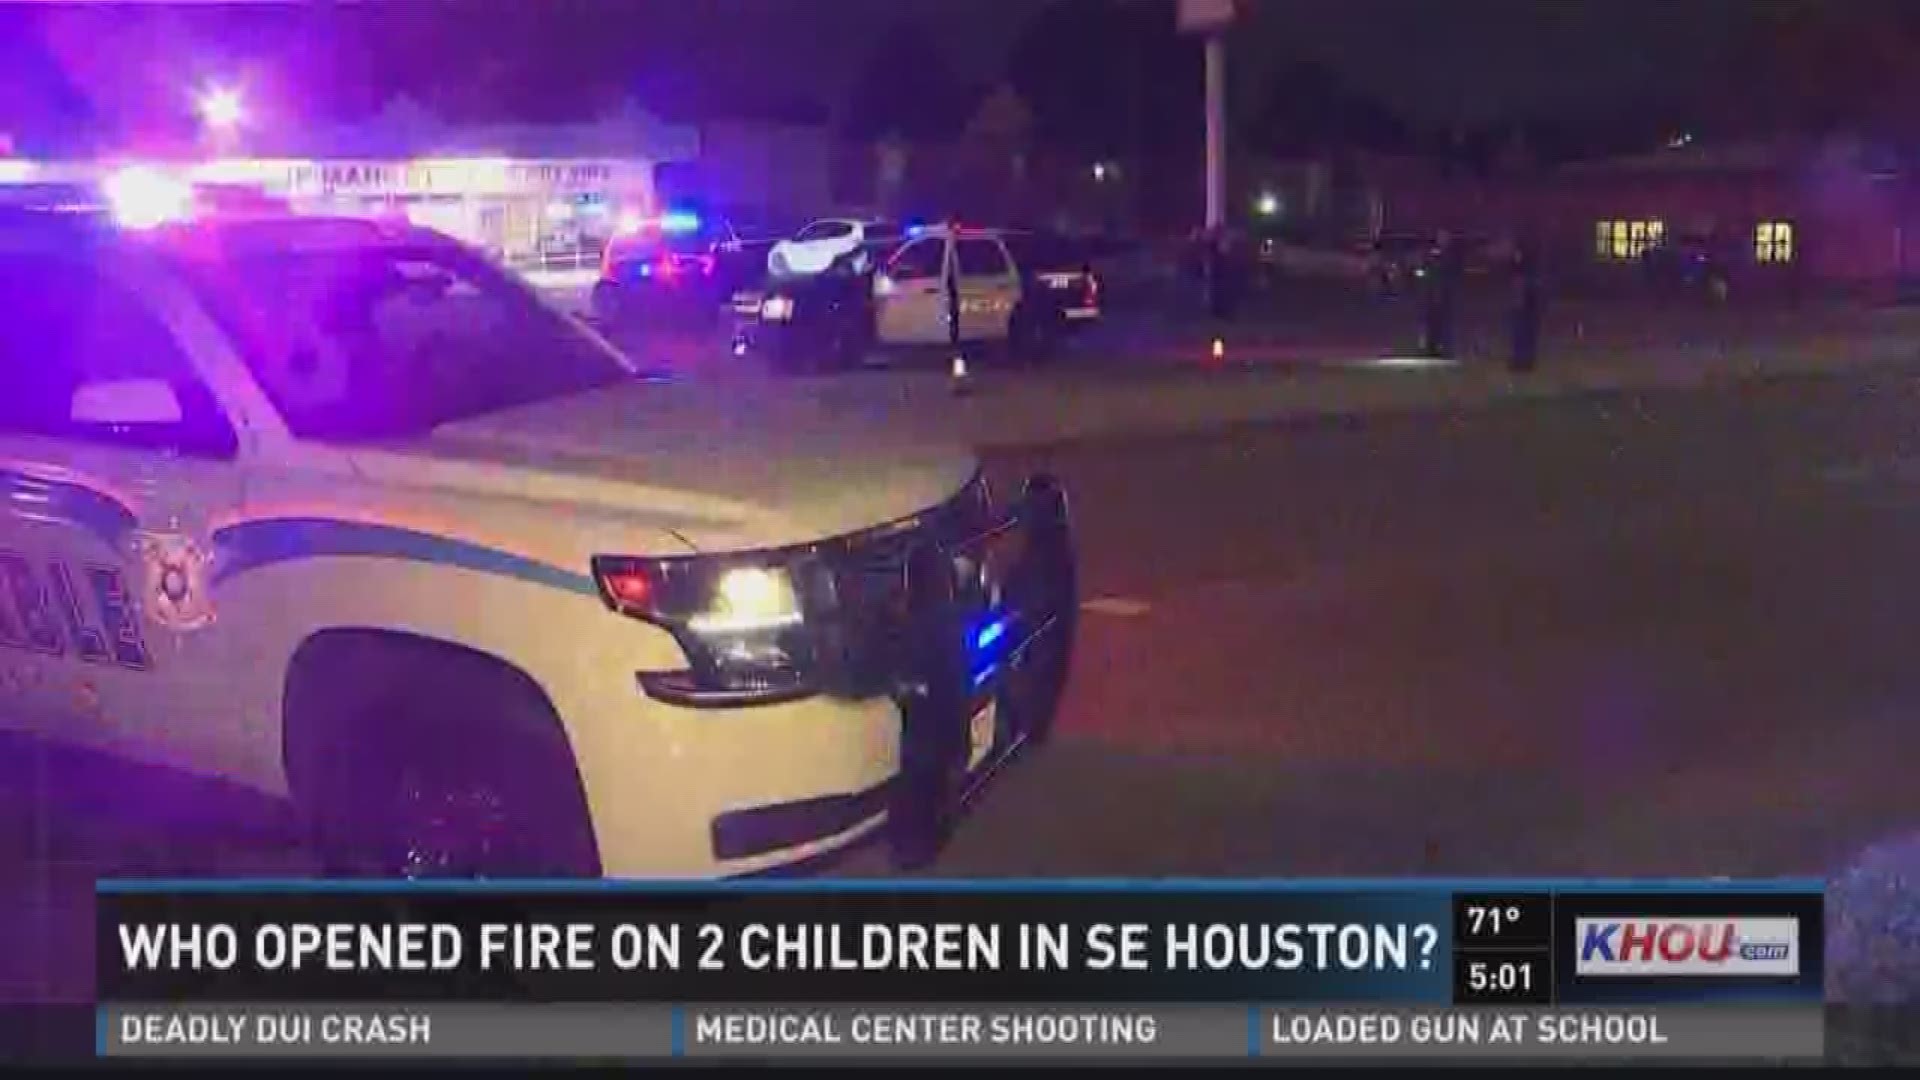 Both children are being treated in the hospital for gunshot wounds, one of whom is in critical condition.